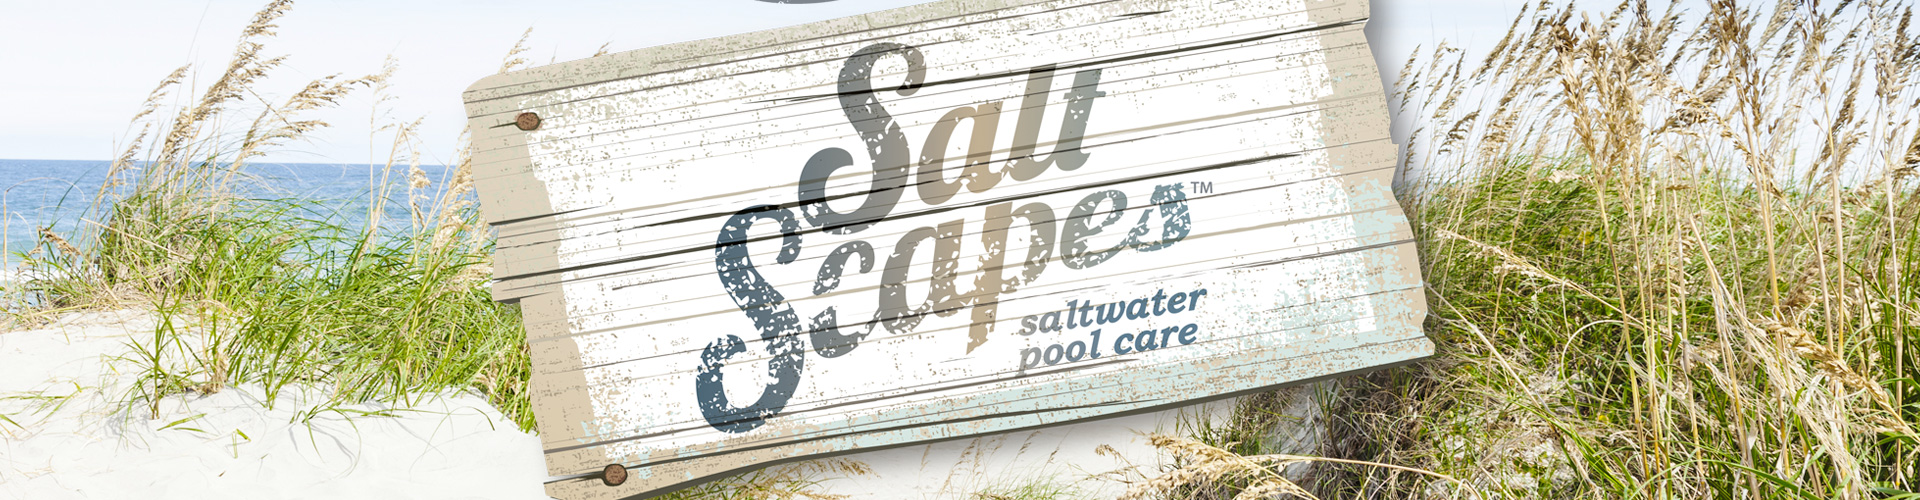 SaltScapes™ Saltwater Pool Care System mobile hero